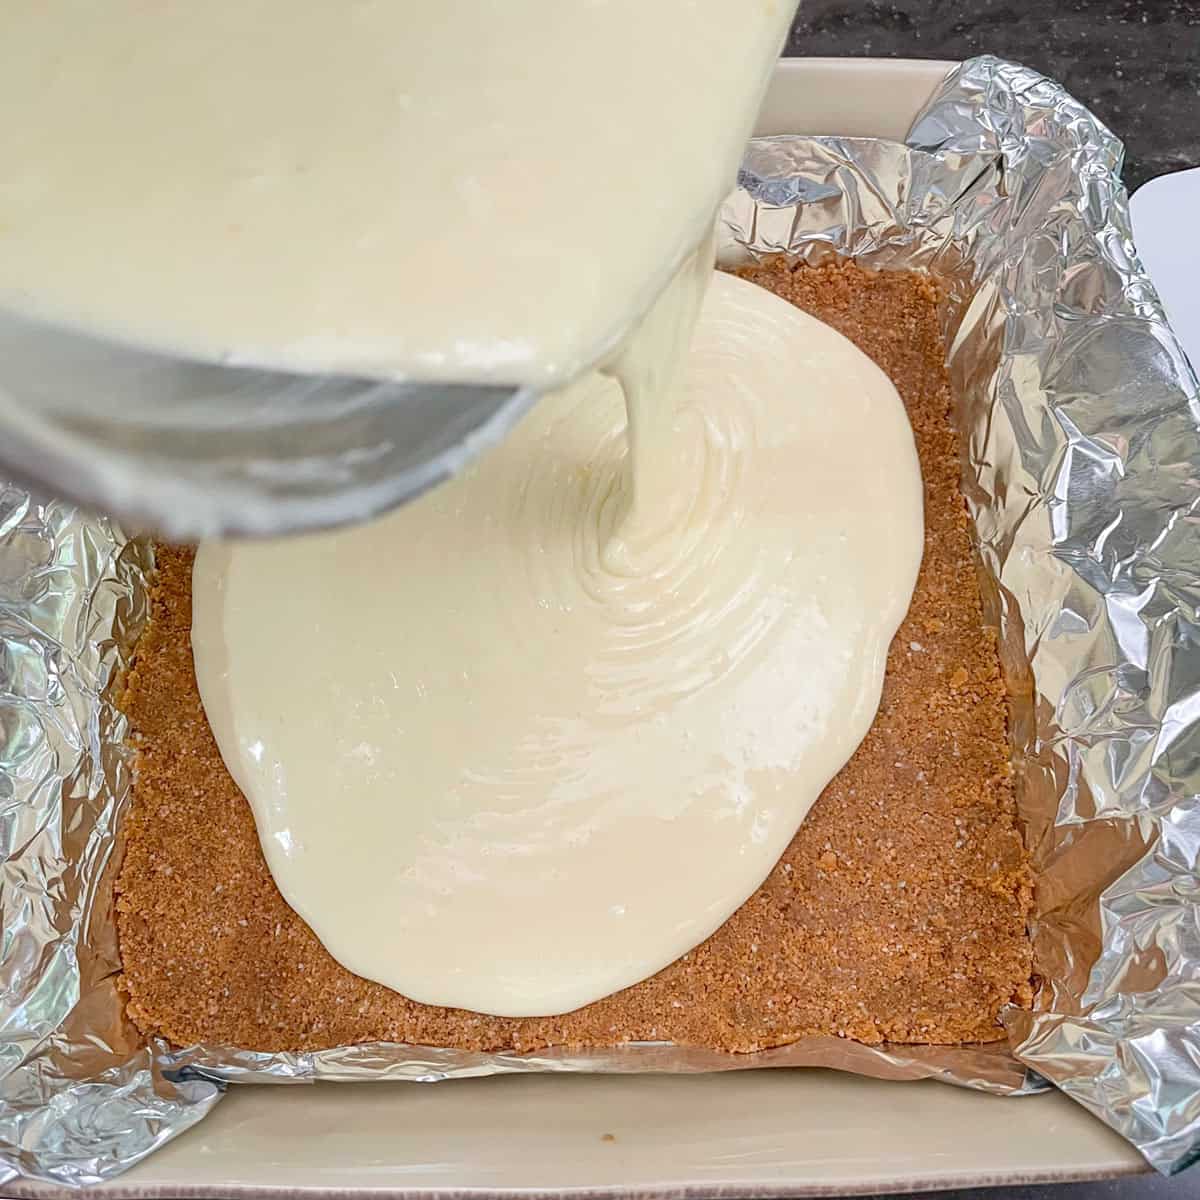 Pouring the cheesecake batter onto the graham cracker crust.